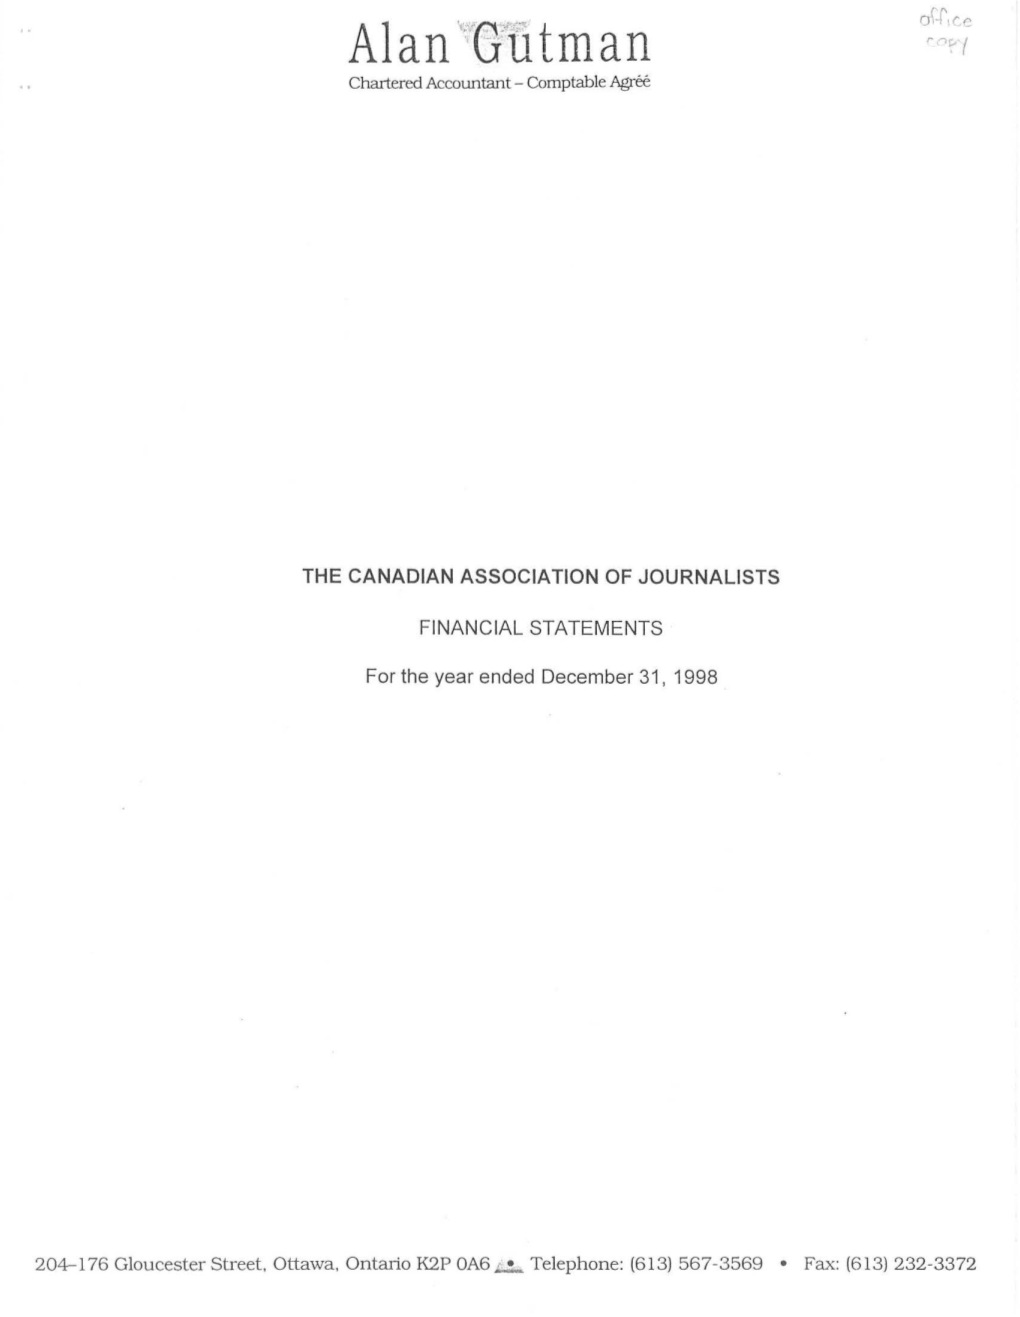 THE CANADIAN ASSOCIATION of JOURNALISTS FINANCIAL STATEMENTS for the Year Ended December 31, 1998